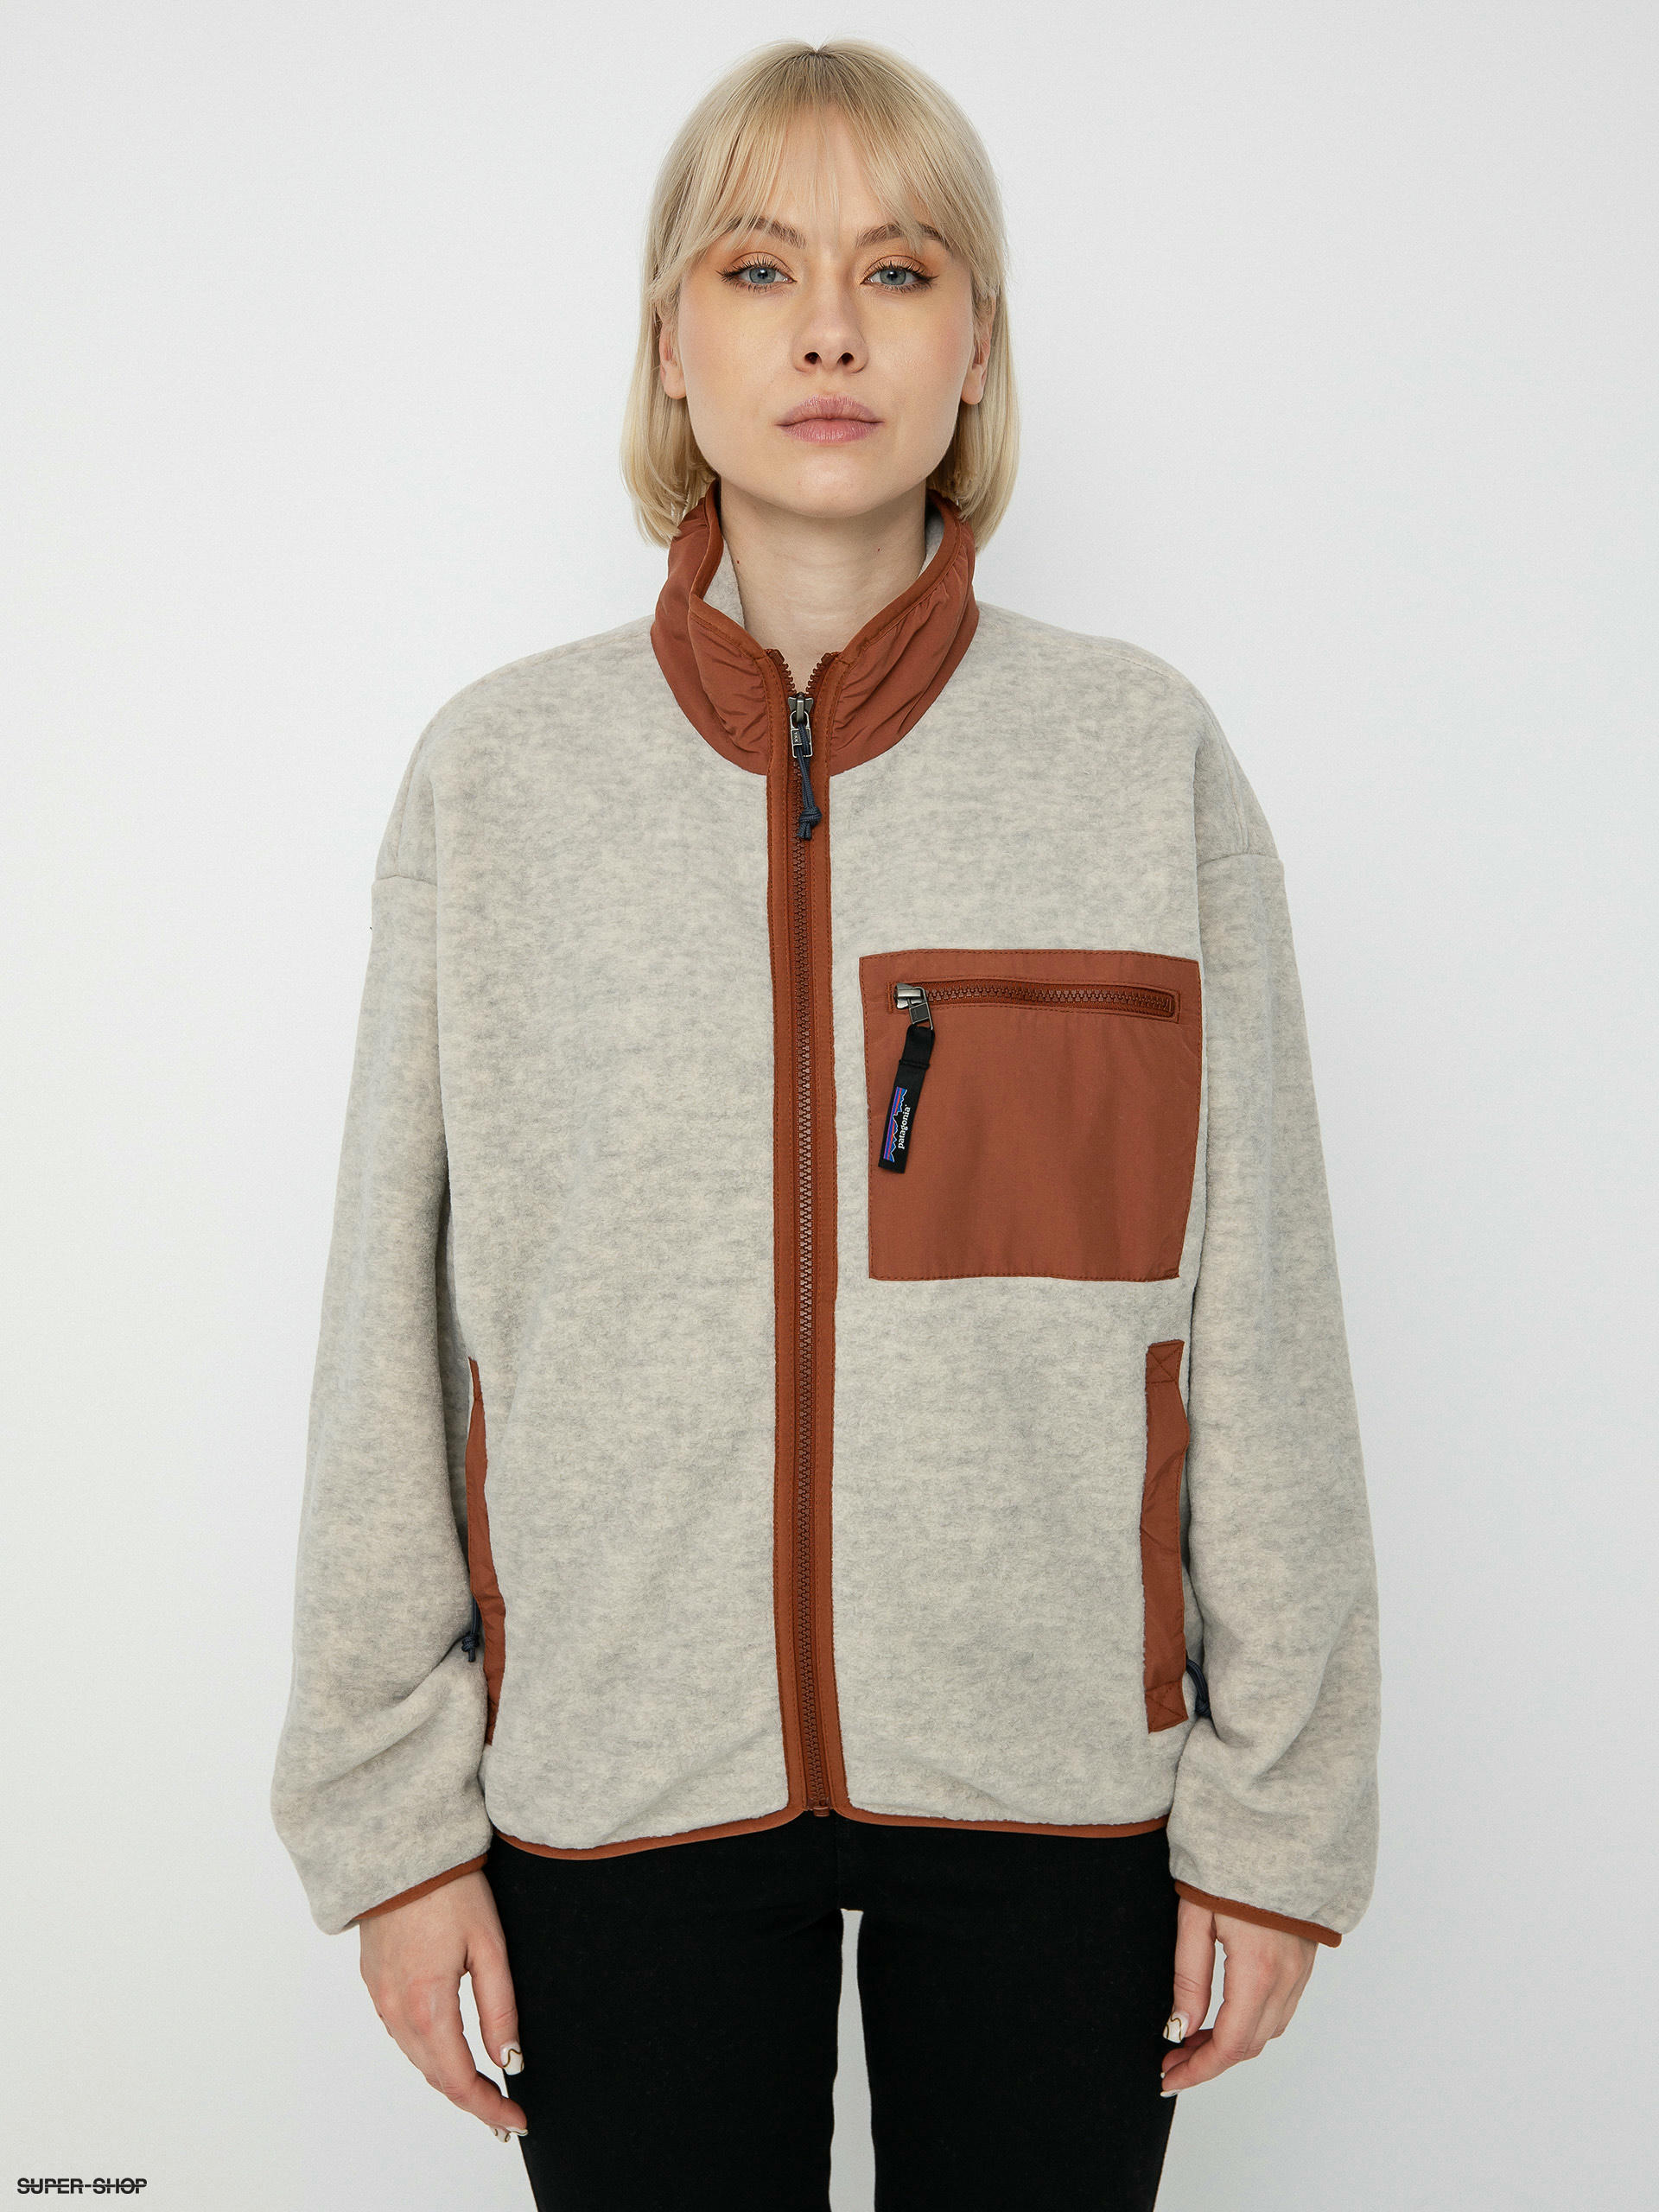 Patagonia Synchilla Fleece - 40% off in Oatmeal Heather and Red Clay at Sun  and Ski. L, XL, and XXL. Free shipping. : r/frugalmalefashion